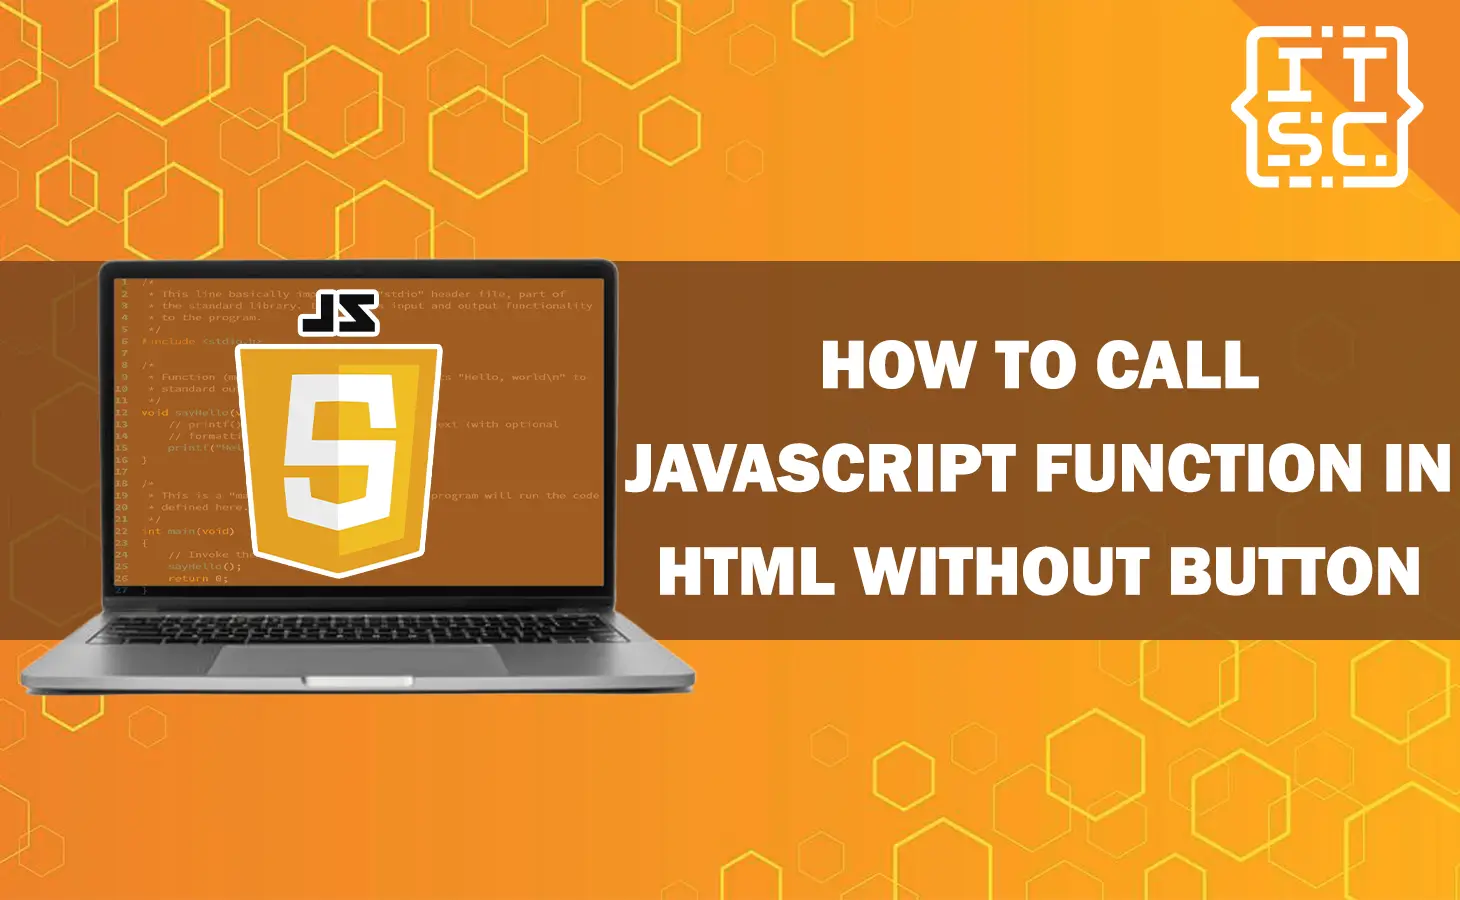 How to call JavaScript function in html without button